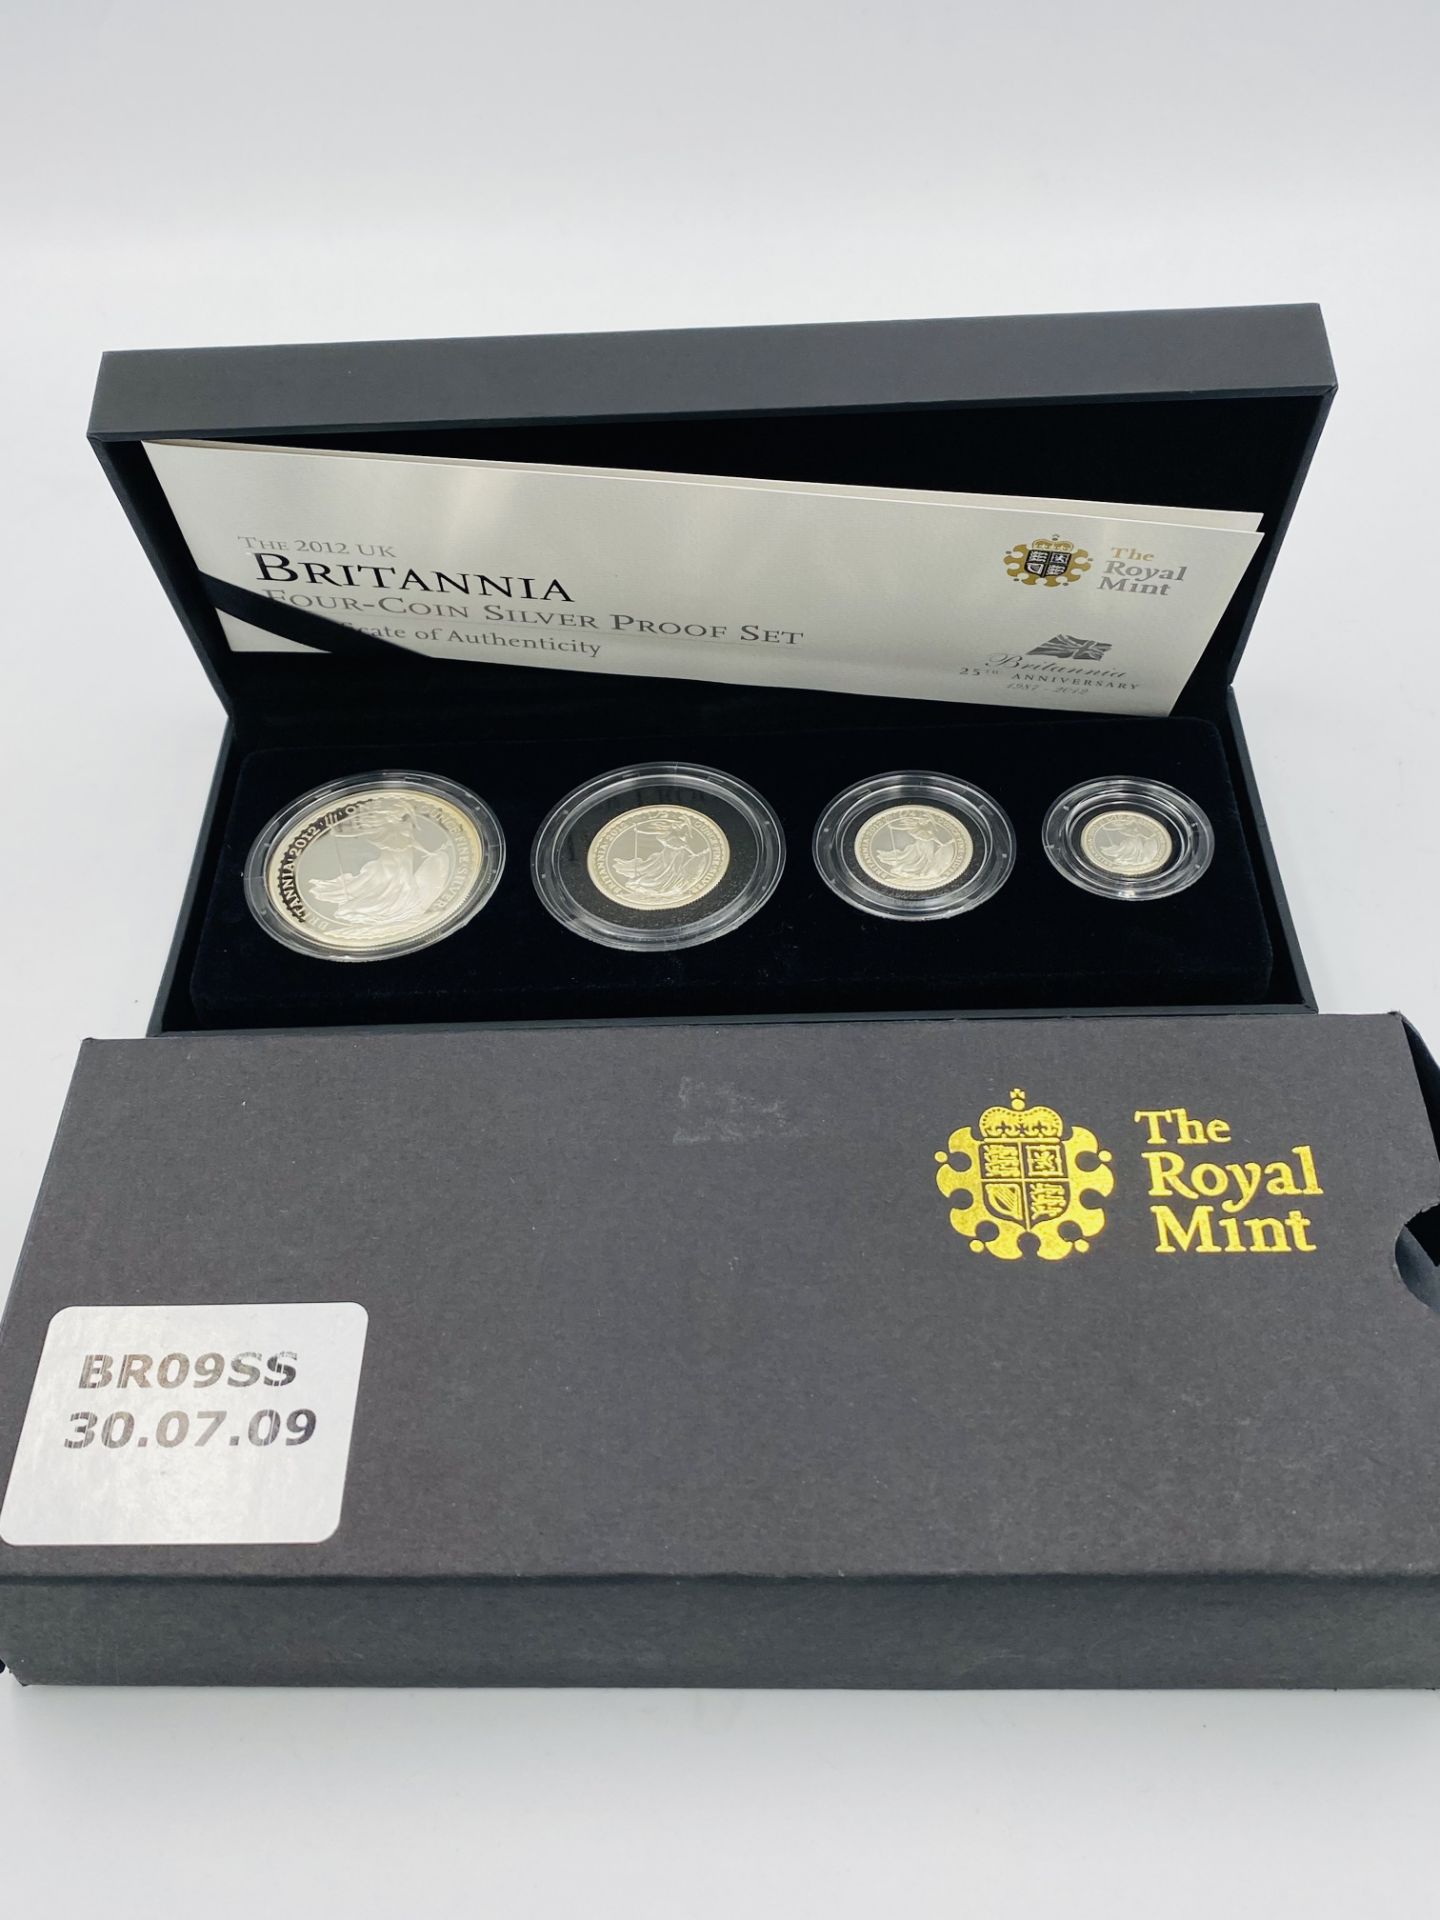 Royal Mint 2012 Britannia four coin silver proof set - Image 2 of 3